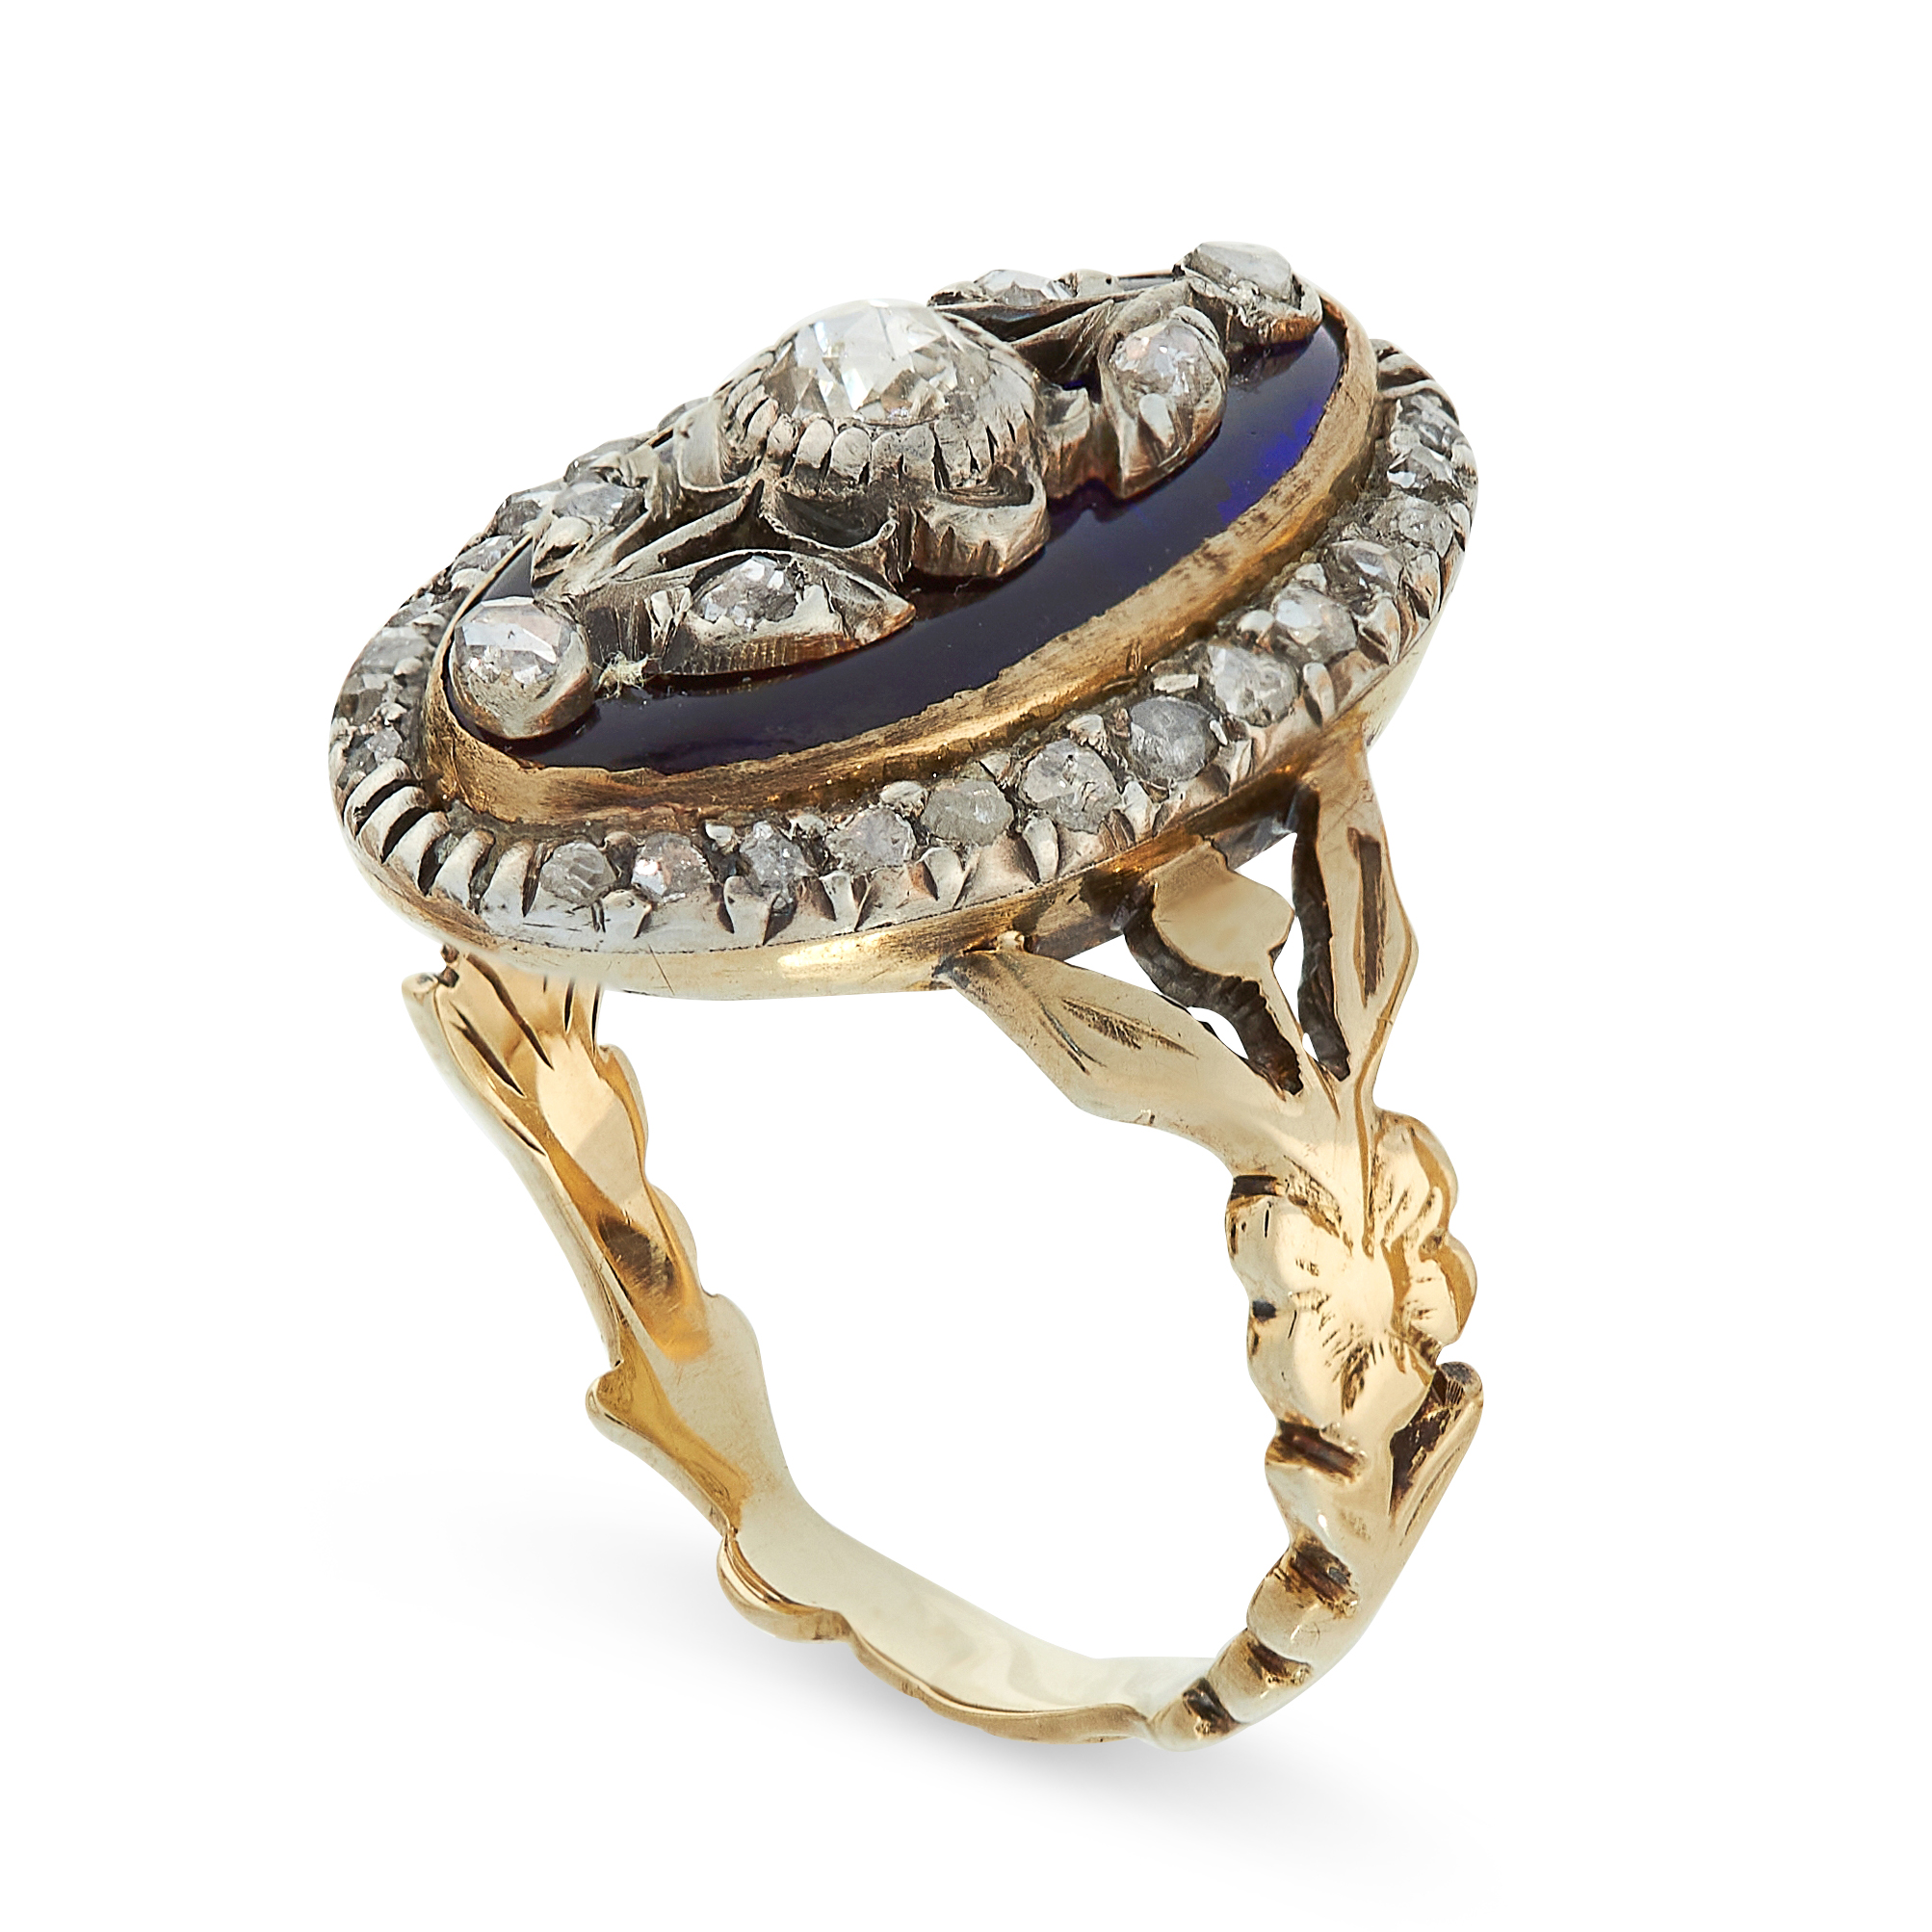 ANTIQUE DIAMOND AND BLUE GLASS BAGUE DE FIRMAMENT RING in yellow gold and silver, the oval face - Image 2 of 2